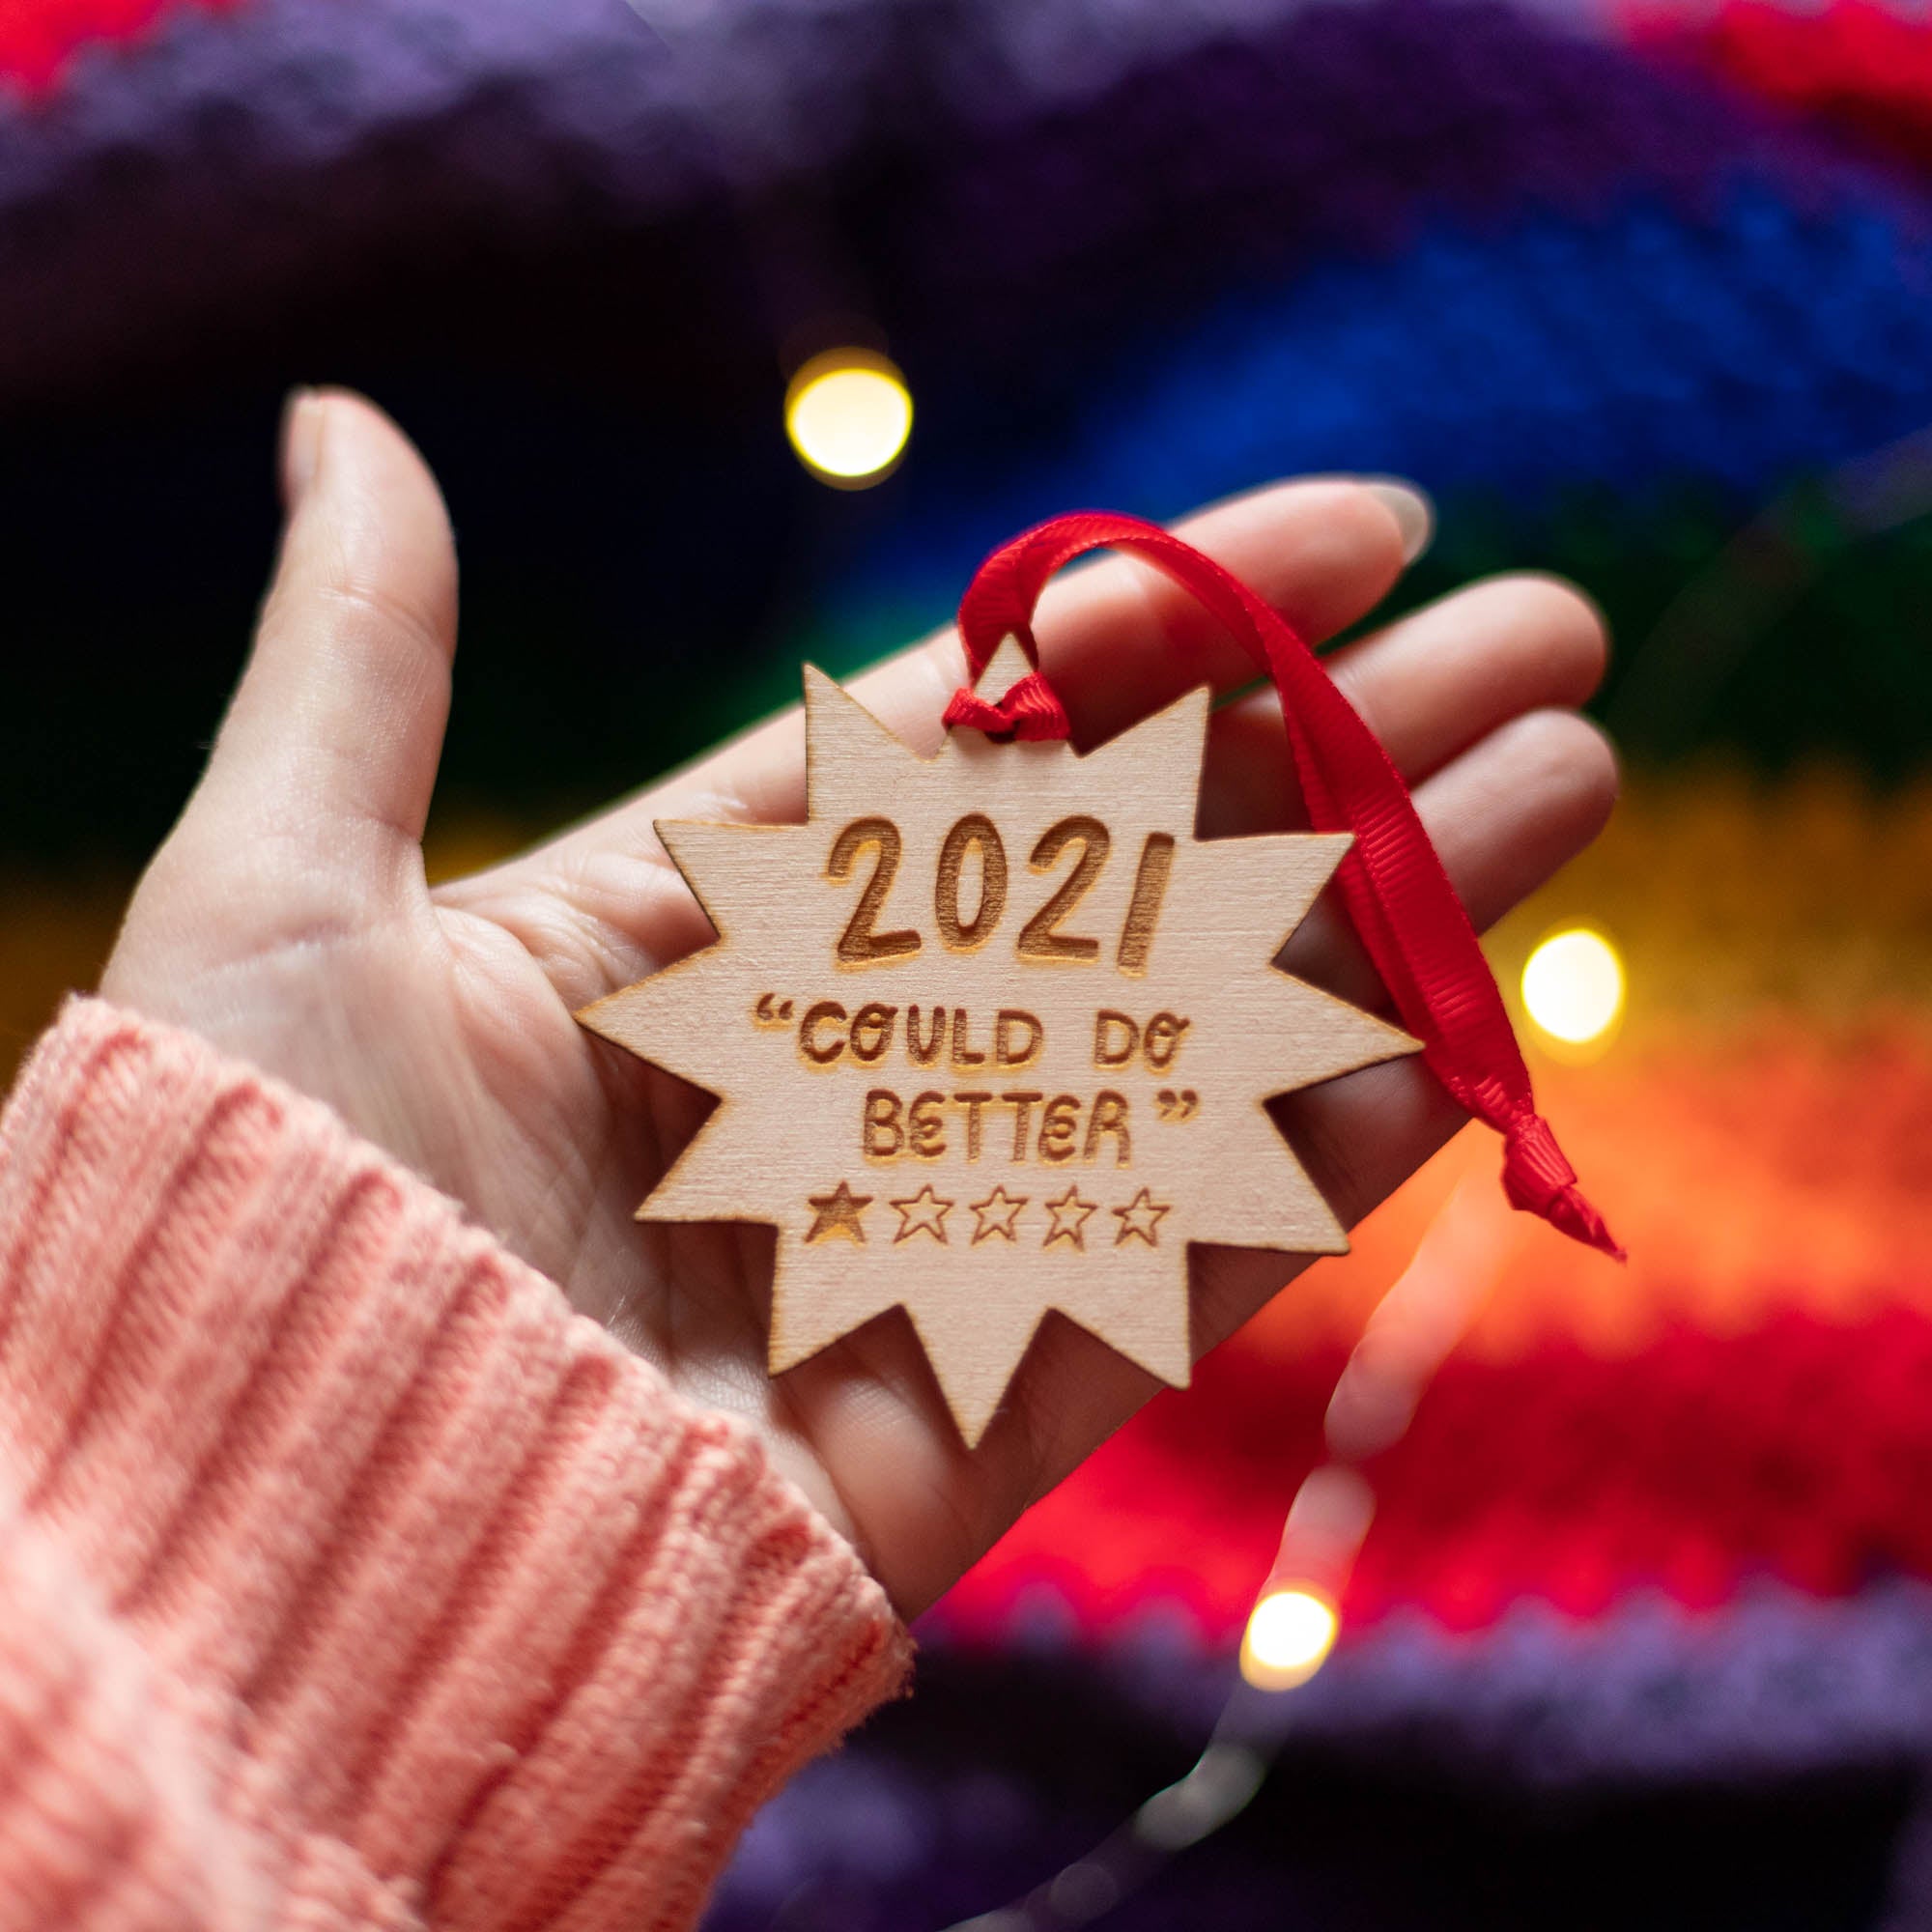 2021 "Could Do Better" Christmas Decoration - Finest Imaginary